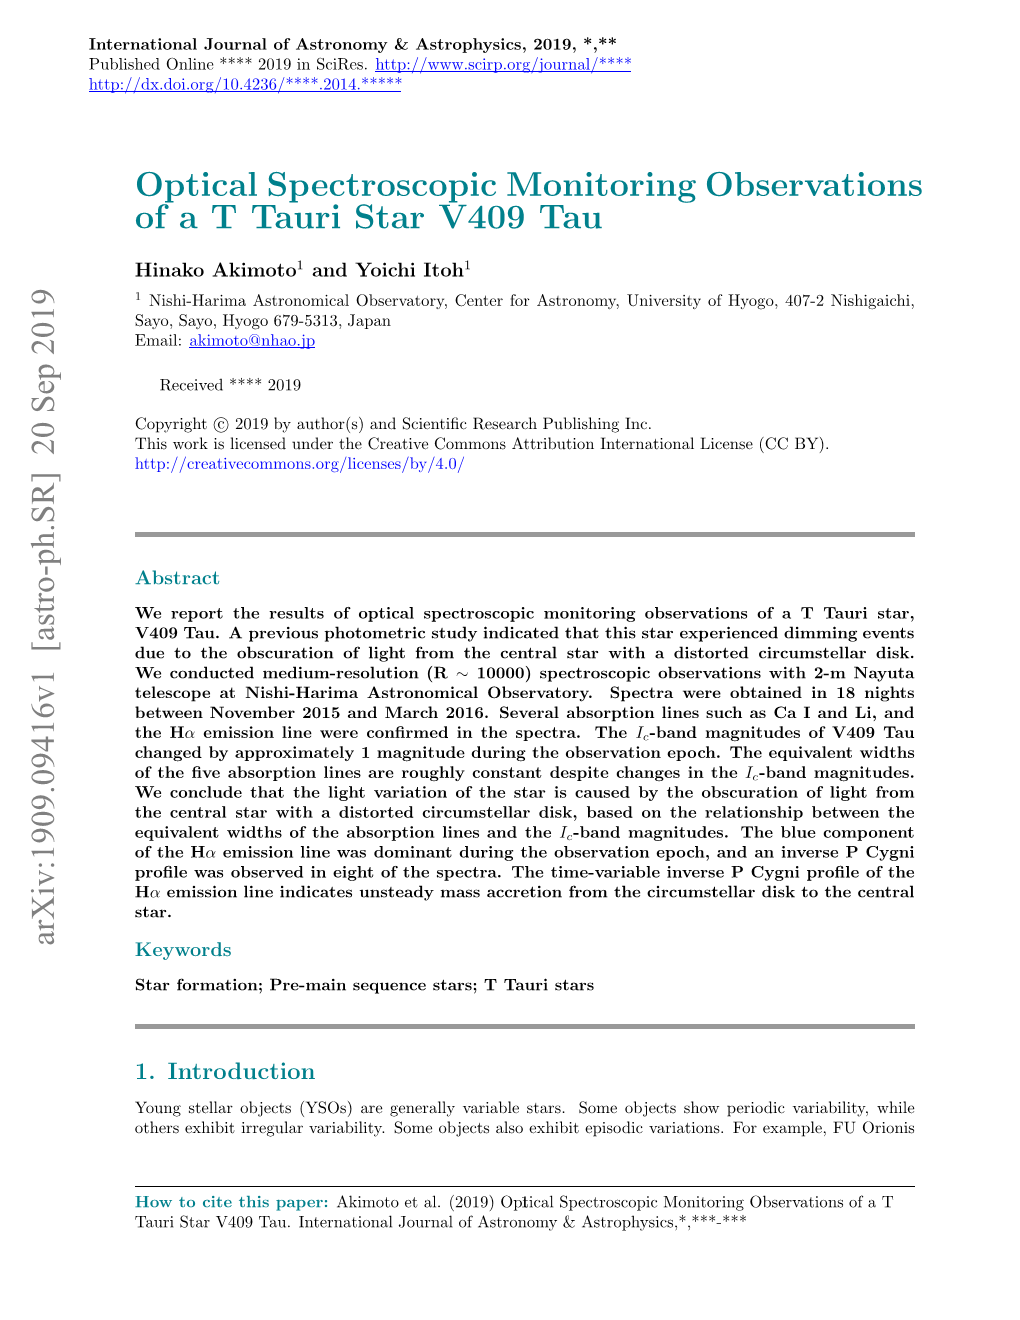 Optical Spectroscopic Monitoring Observations of a T Tauri Star V409